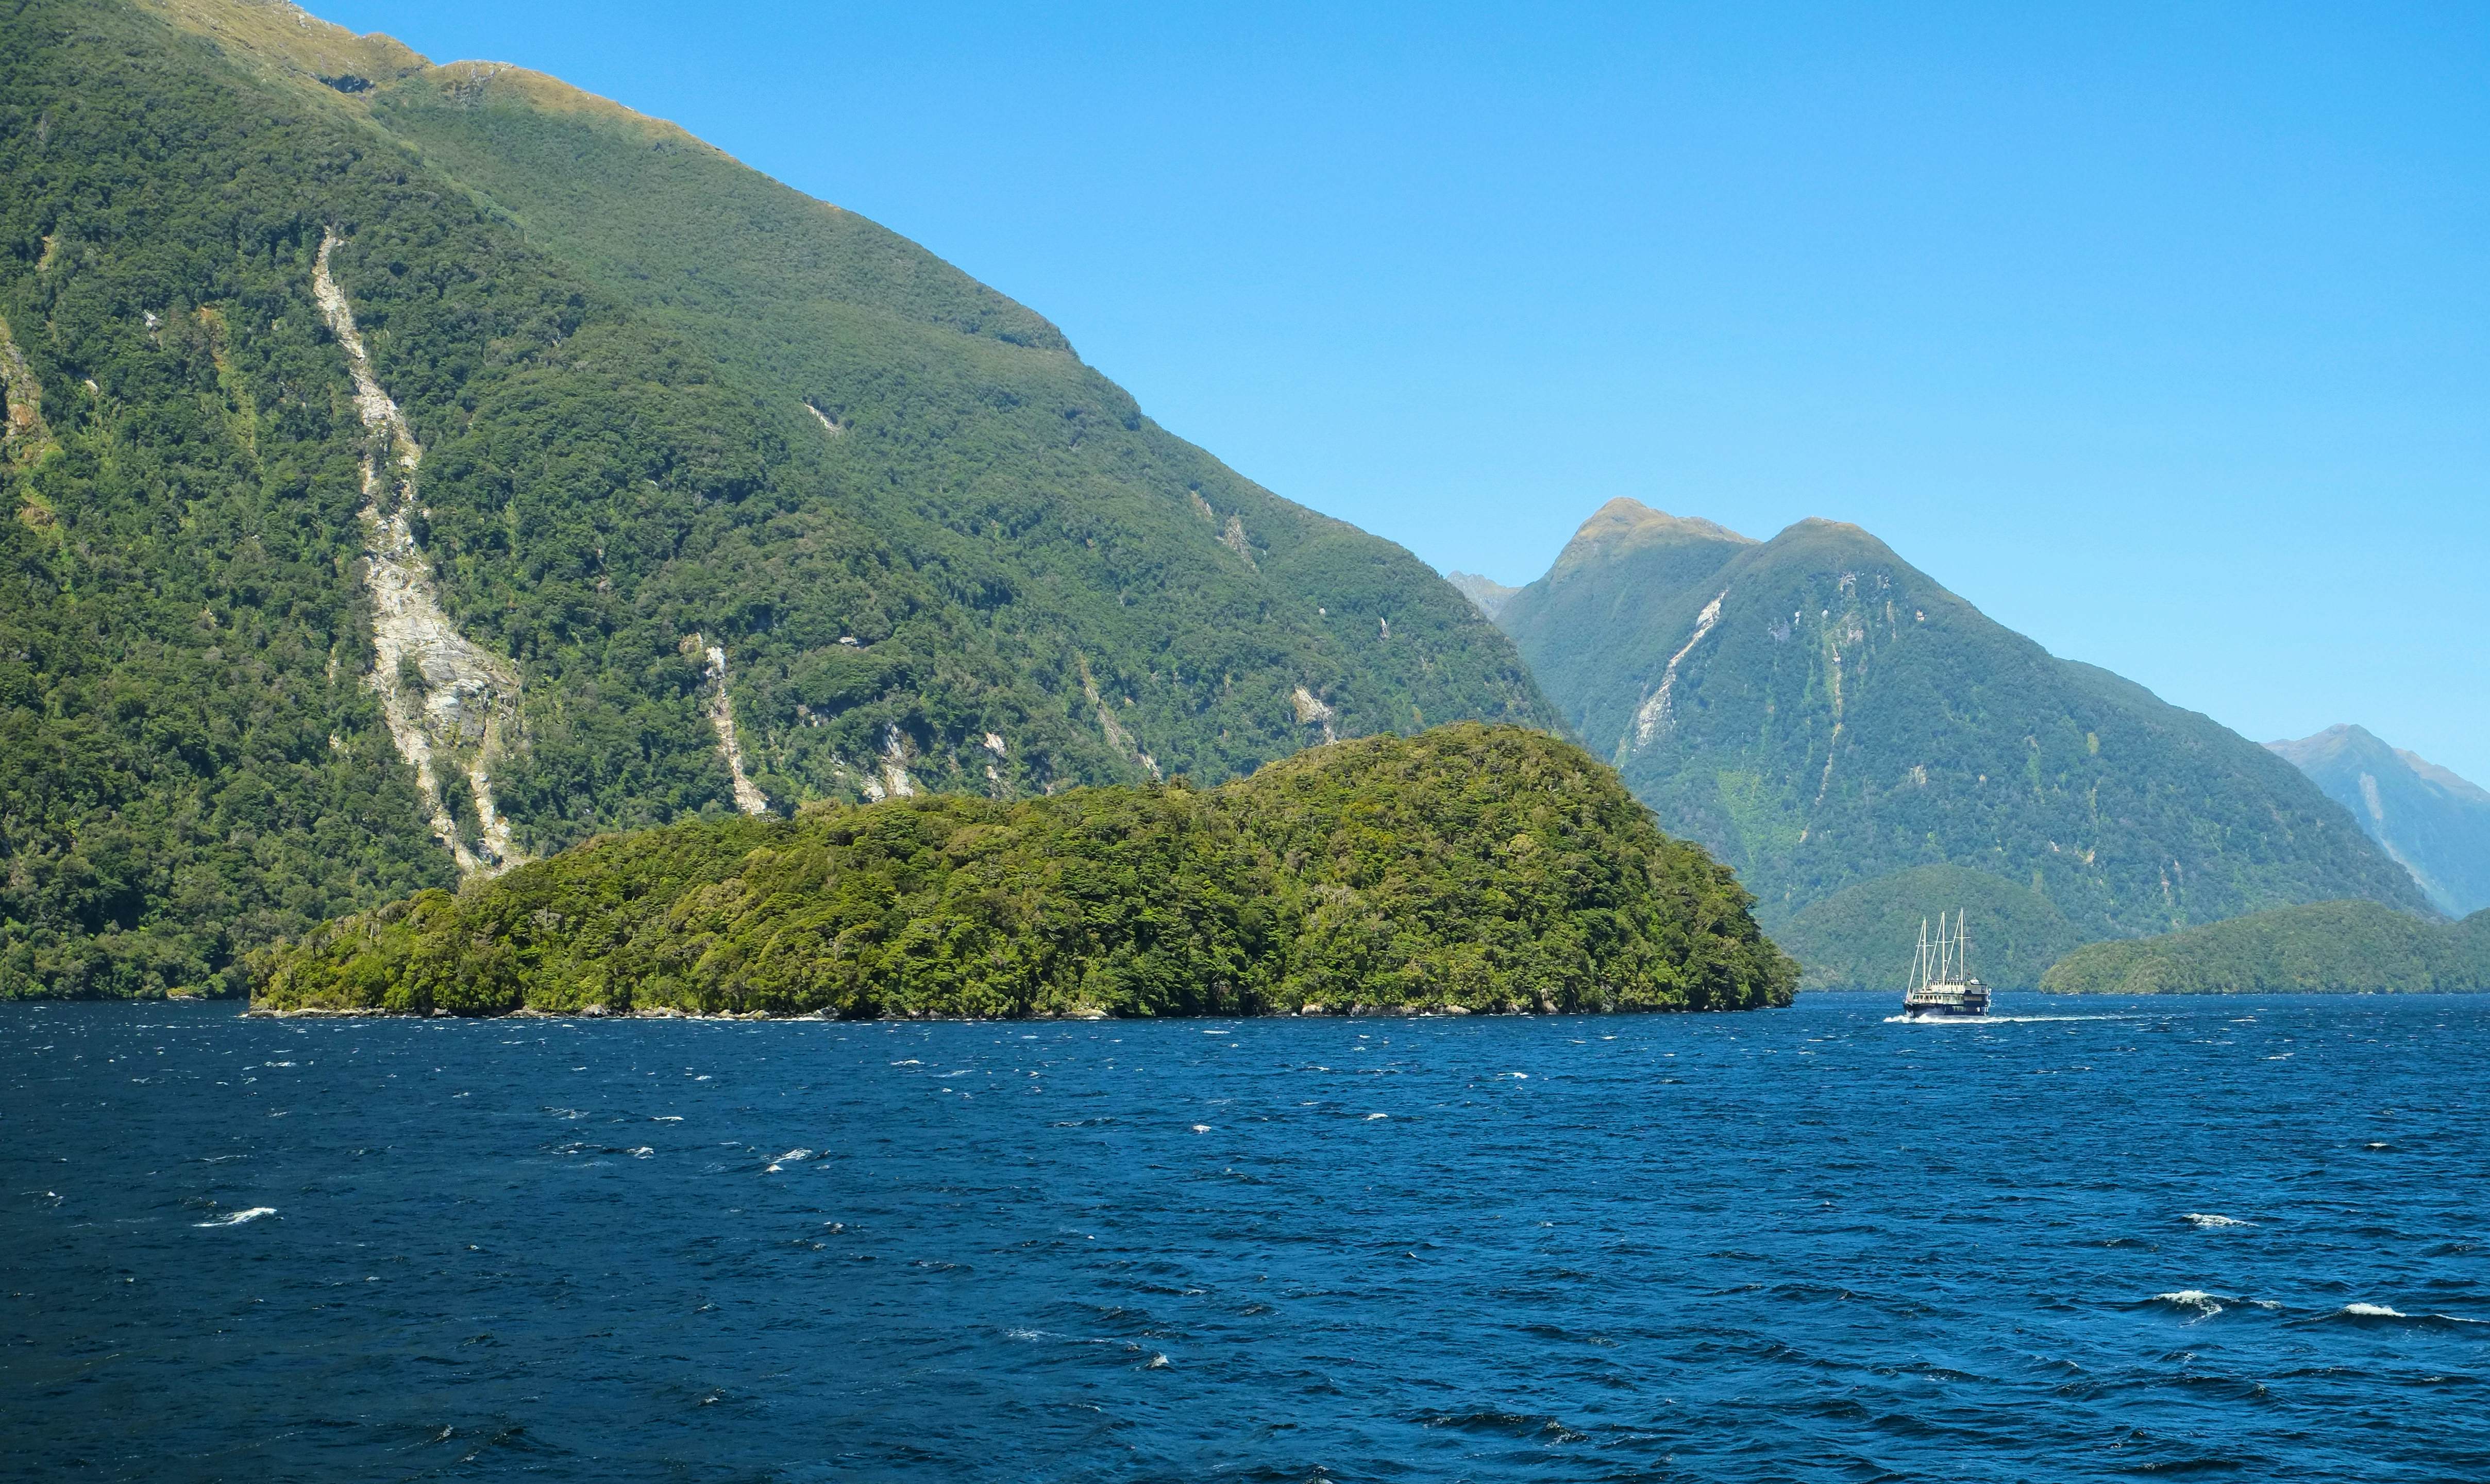 Magical experience and stunning scenary at the Doubtful Sound Wilderness cruise and Fiordland National Park